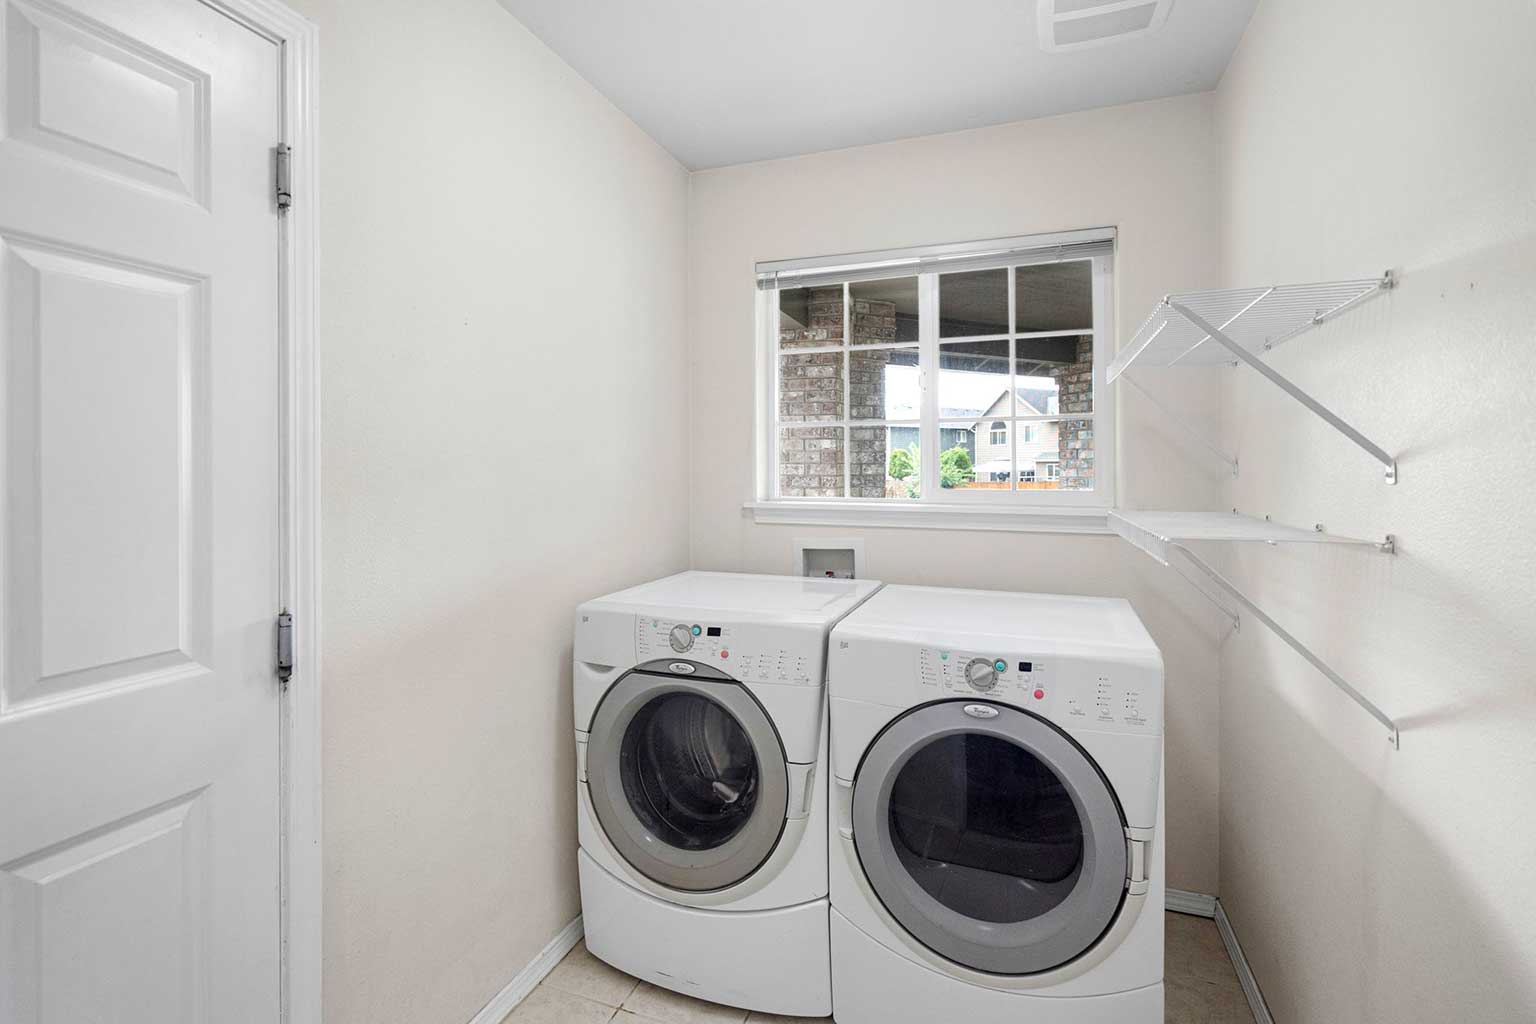 Laundry room off the family room with direct access to attached garage